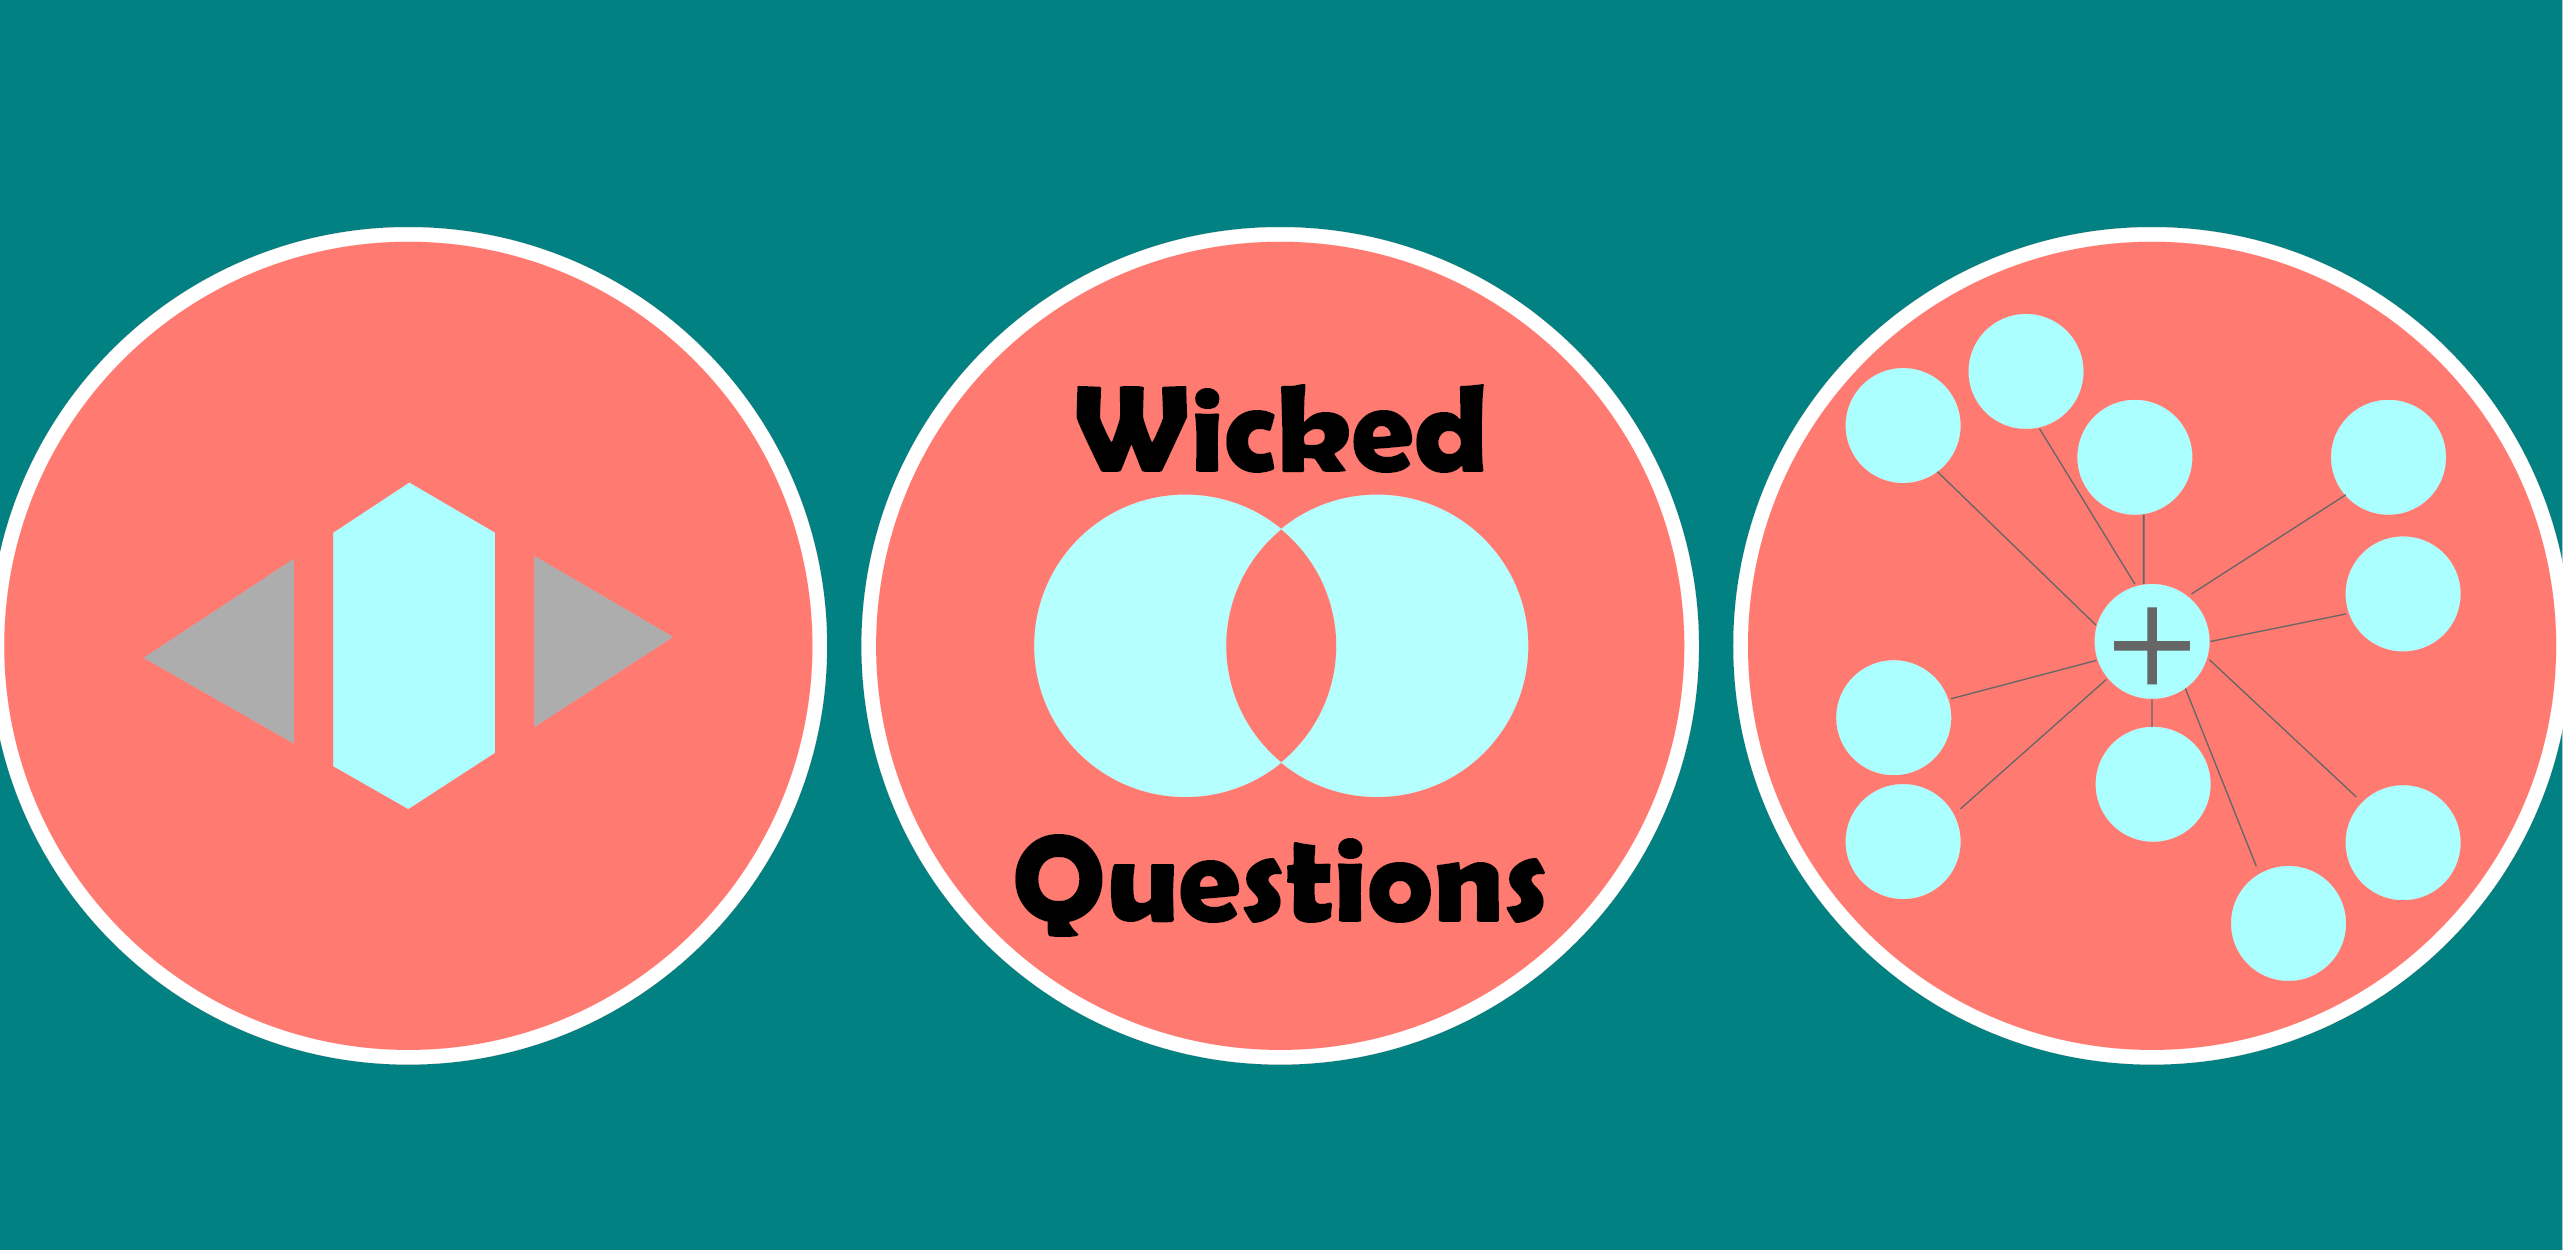 Wicked Questions with three circular icons, representing convergence / divergence, inclusion / exclusion and centralized /distributed